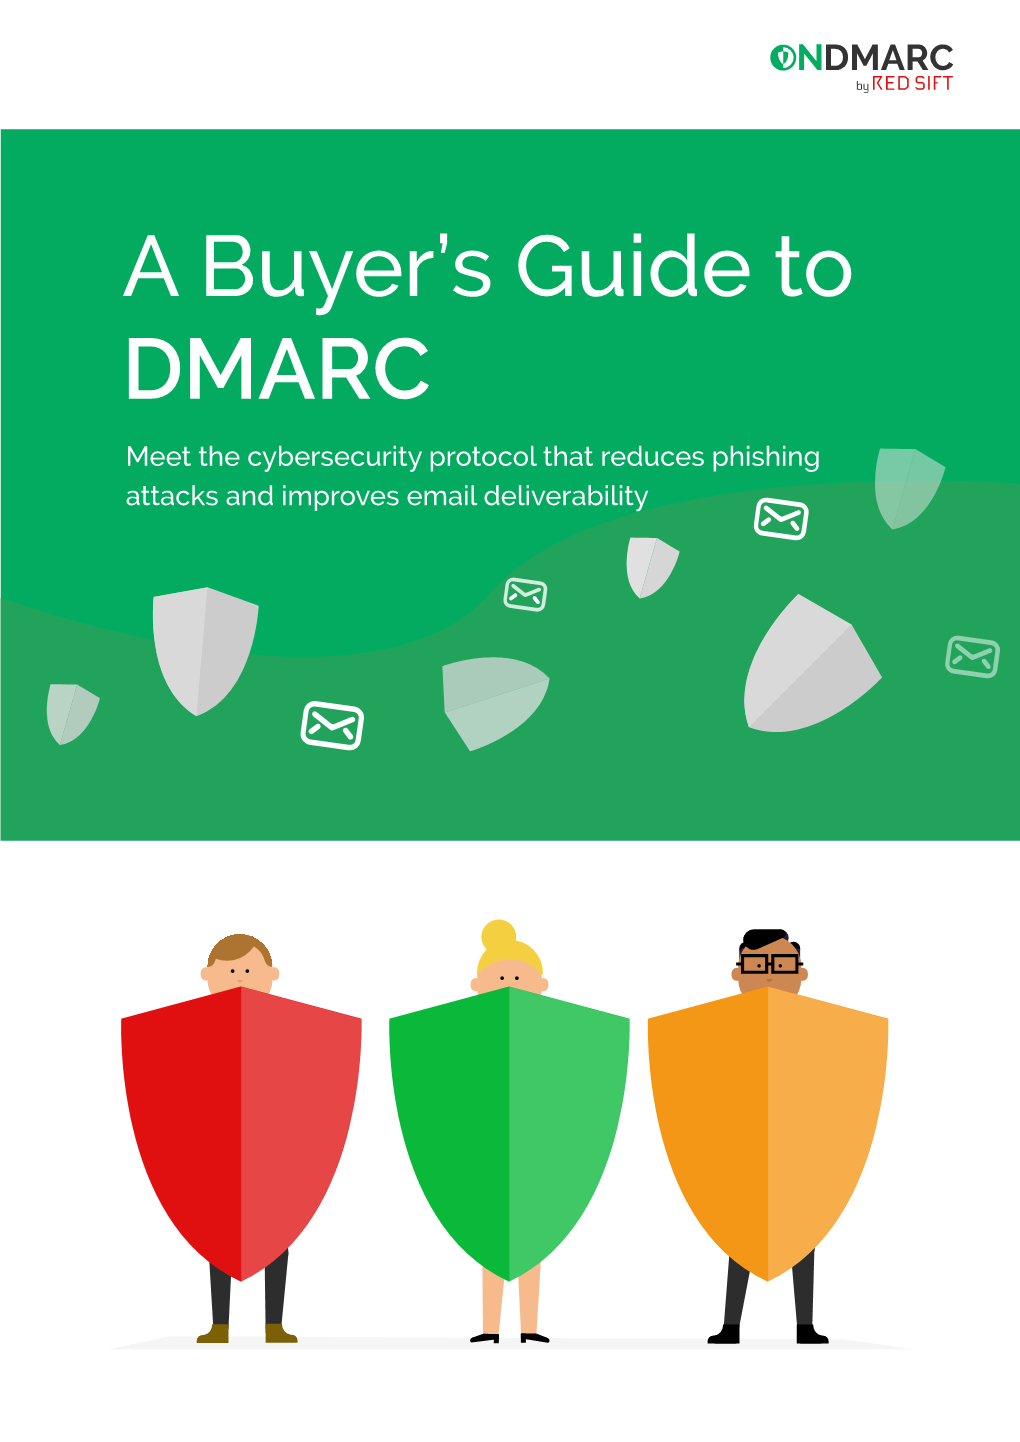 A Buyer's Guide to DMARC